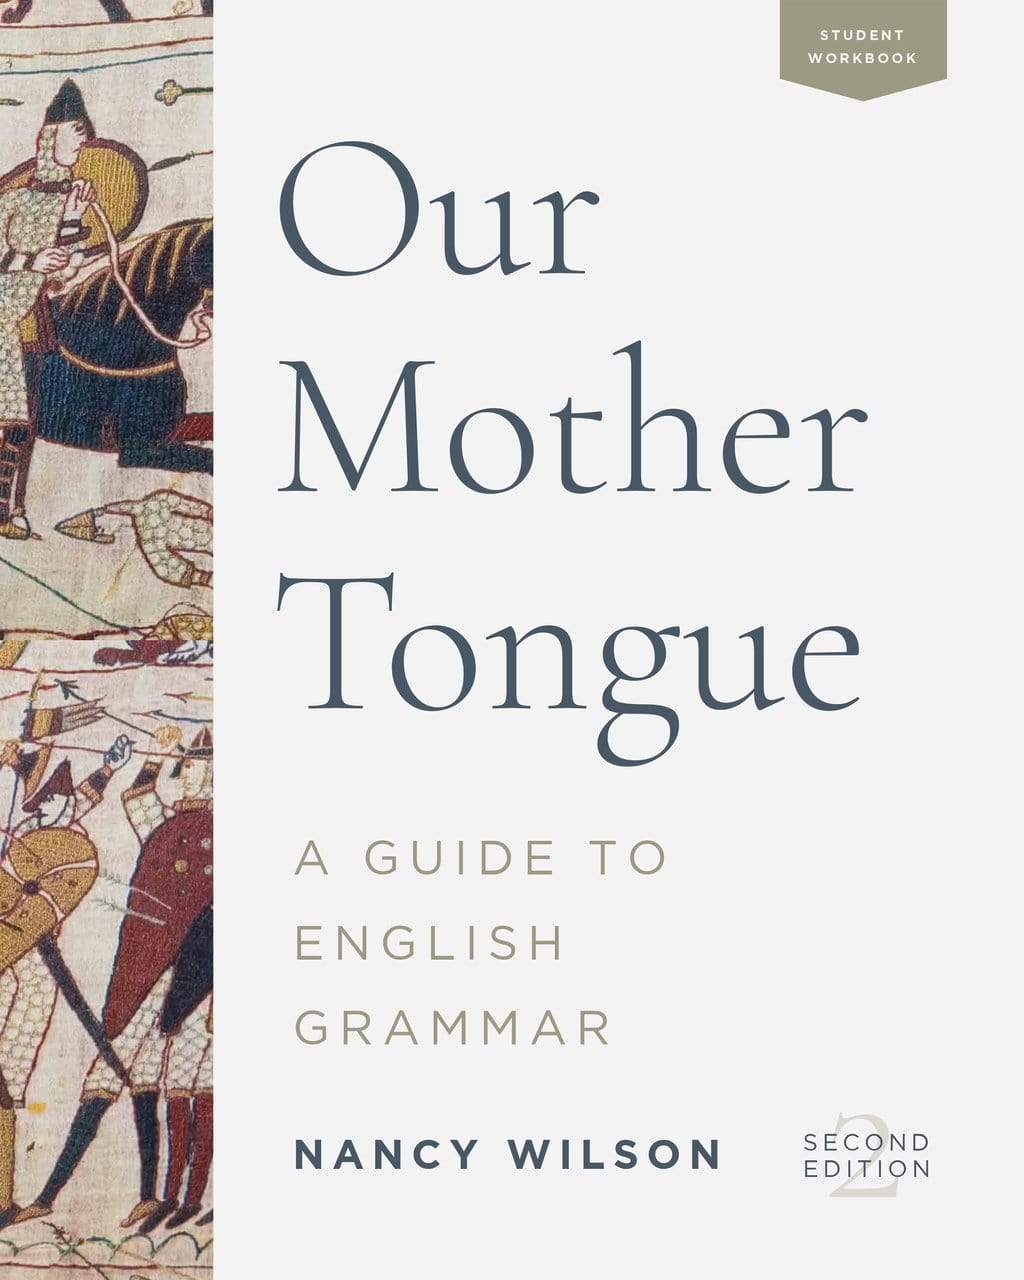 Our Mother Tongue: A Guide to English Grammar, by Nancy Wilson, Second Edition. Student Workbook. Cover includes images from Bayeaux Tapestry, taken from the time of the Norman Invasion of England which changed the language forever.